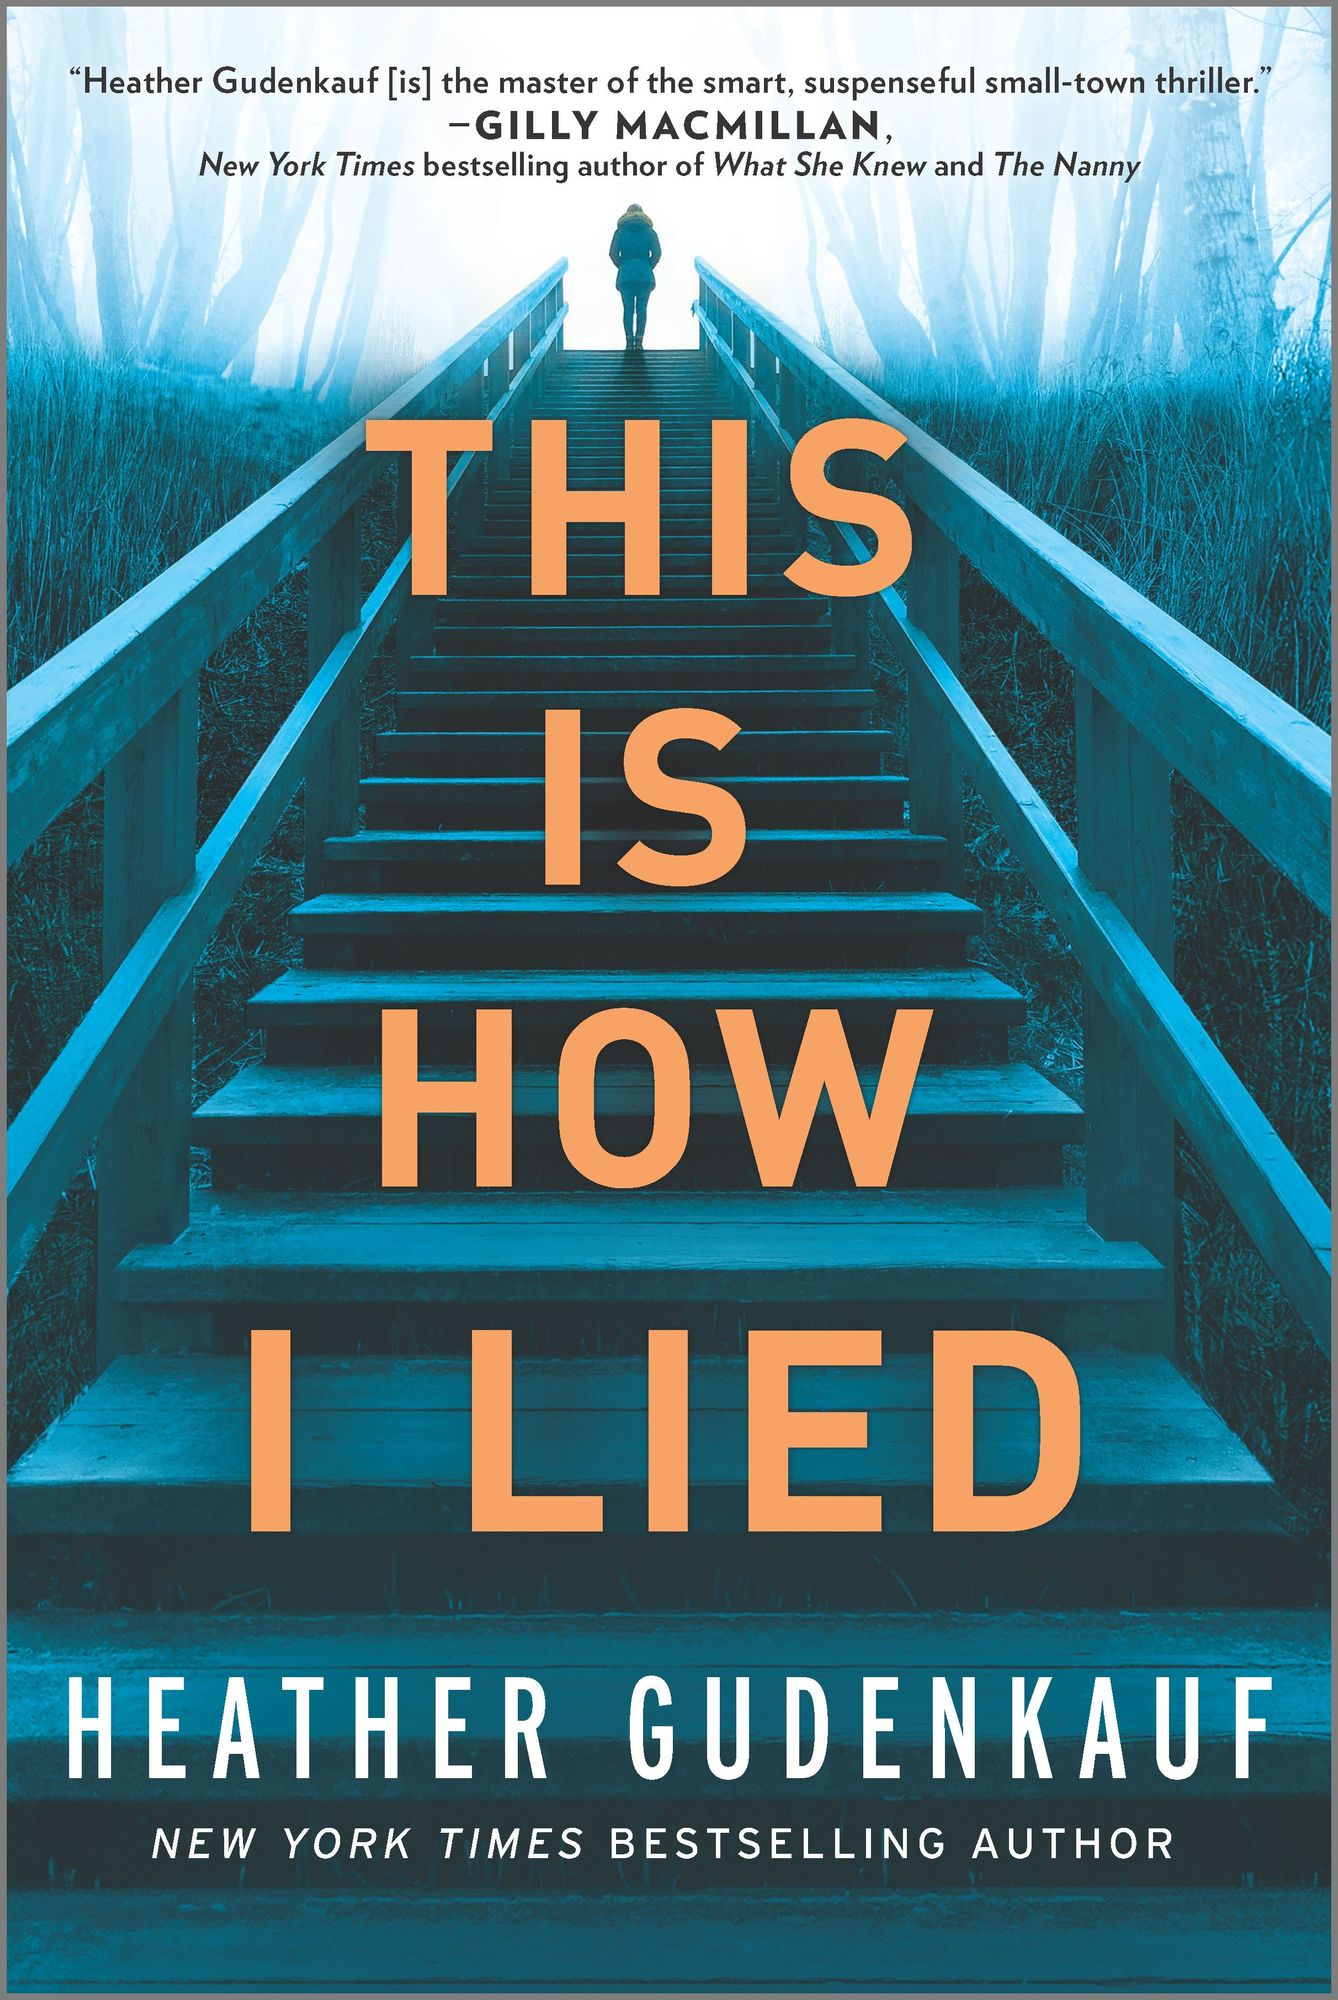 This is How I Lied by Heather Gudenkauf